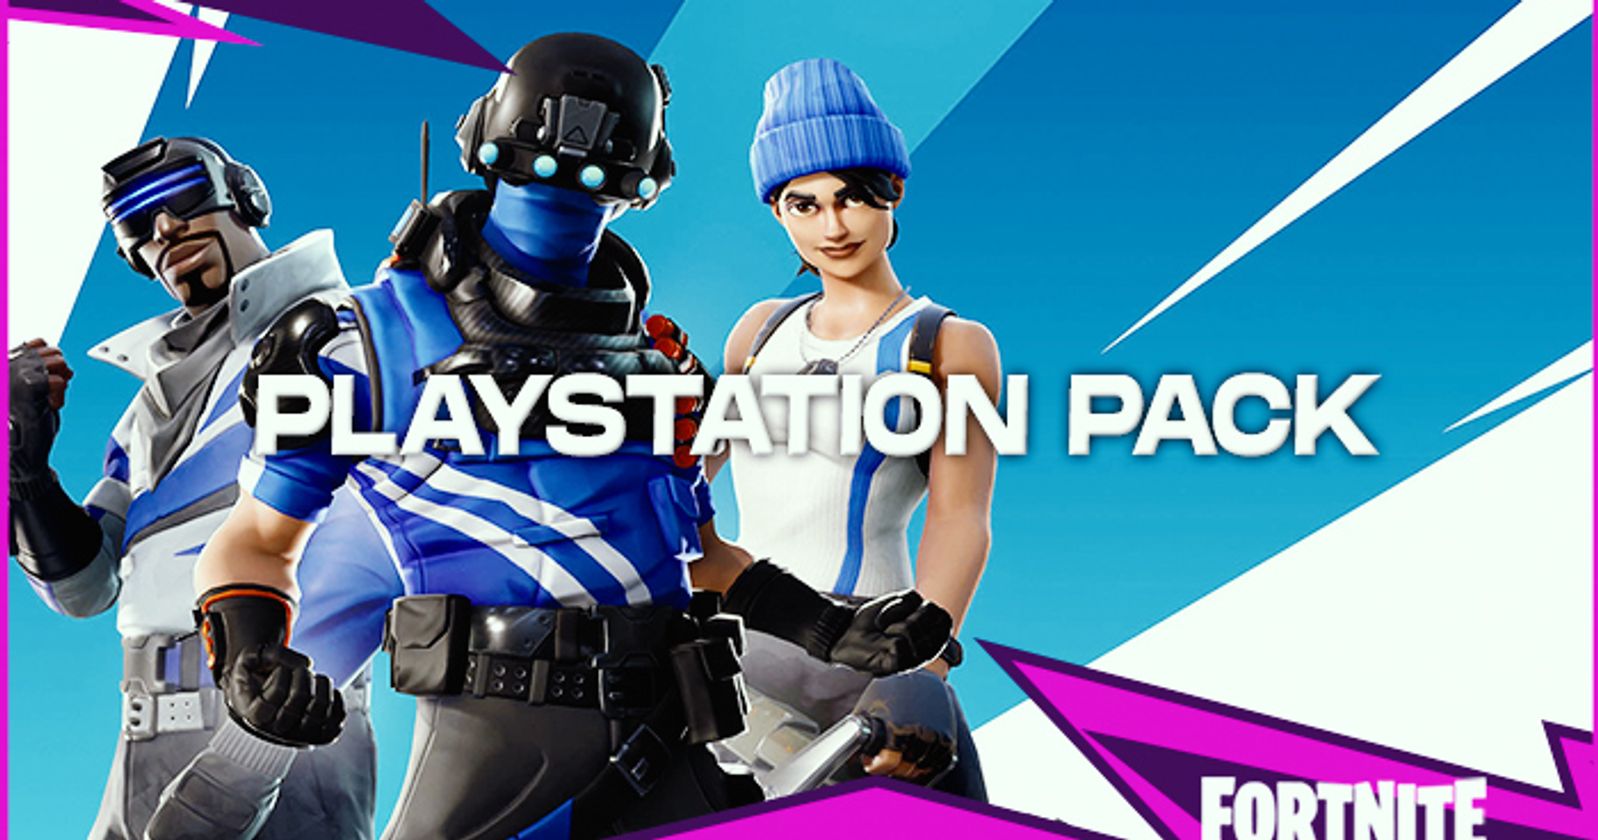 Fortnite: How To Get The NEW Playstation Plus Pack - Skin, Emote